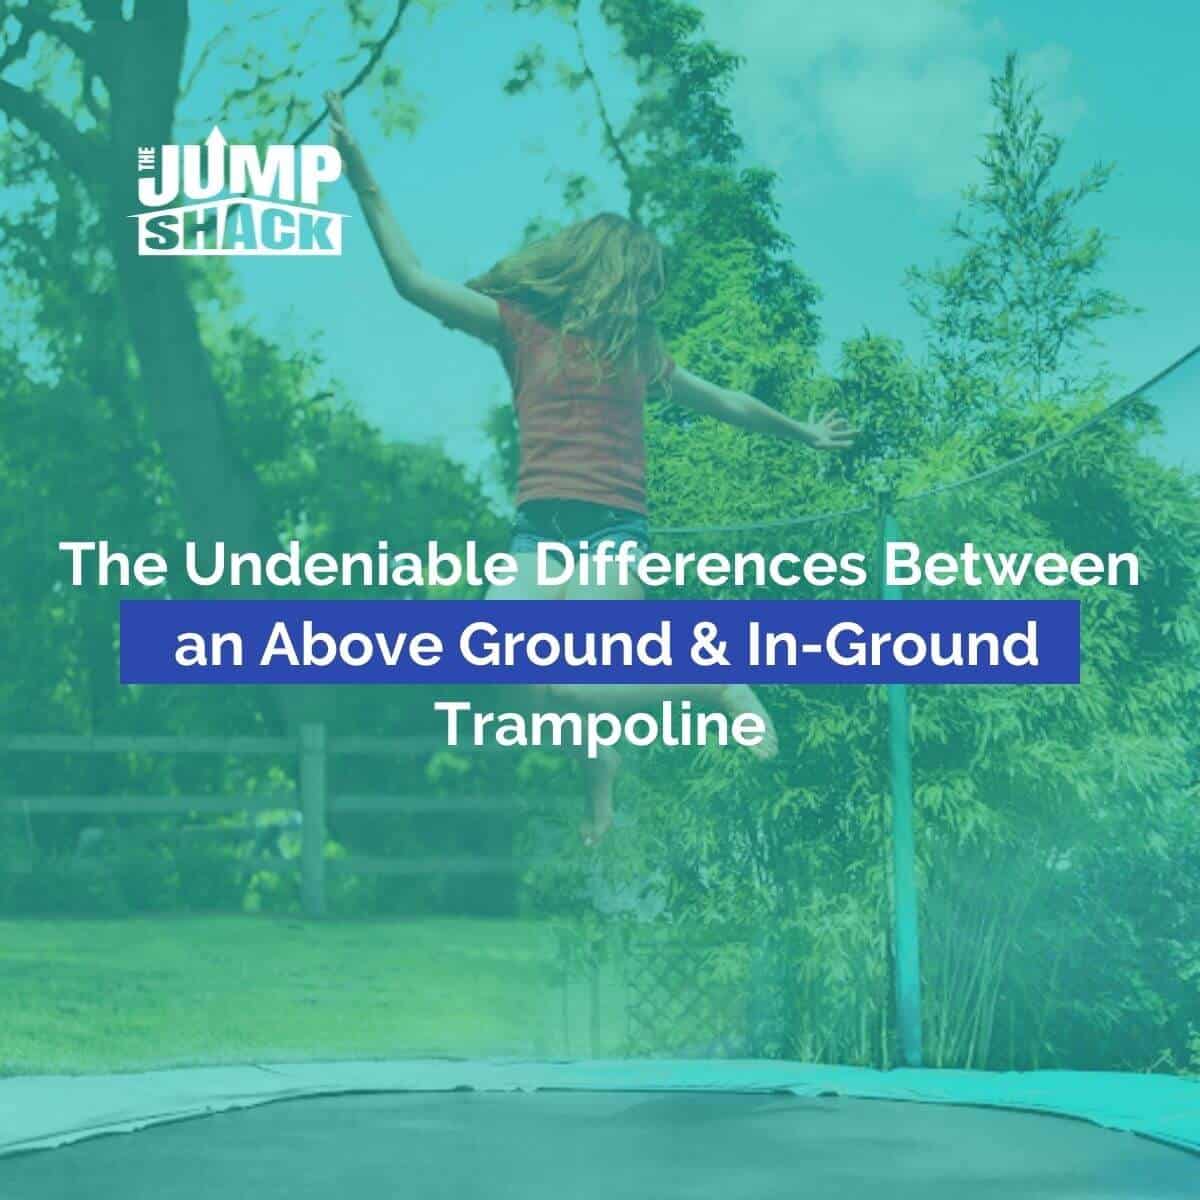 The Undeniable Differences Between an Above Ground & In-Ground Trampoline